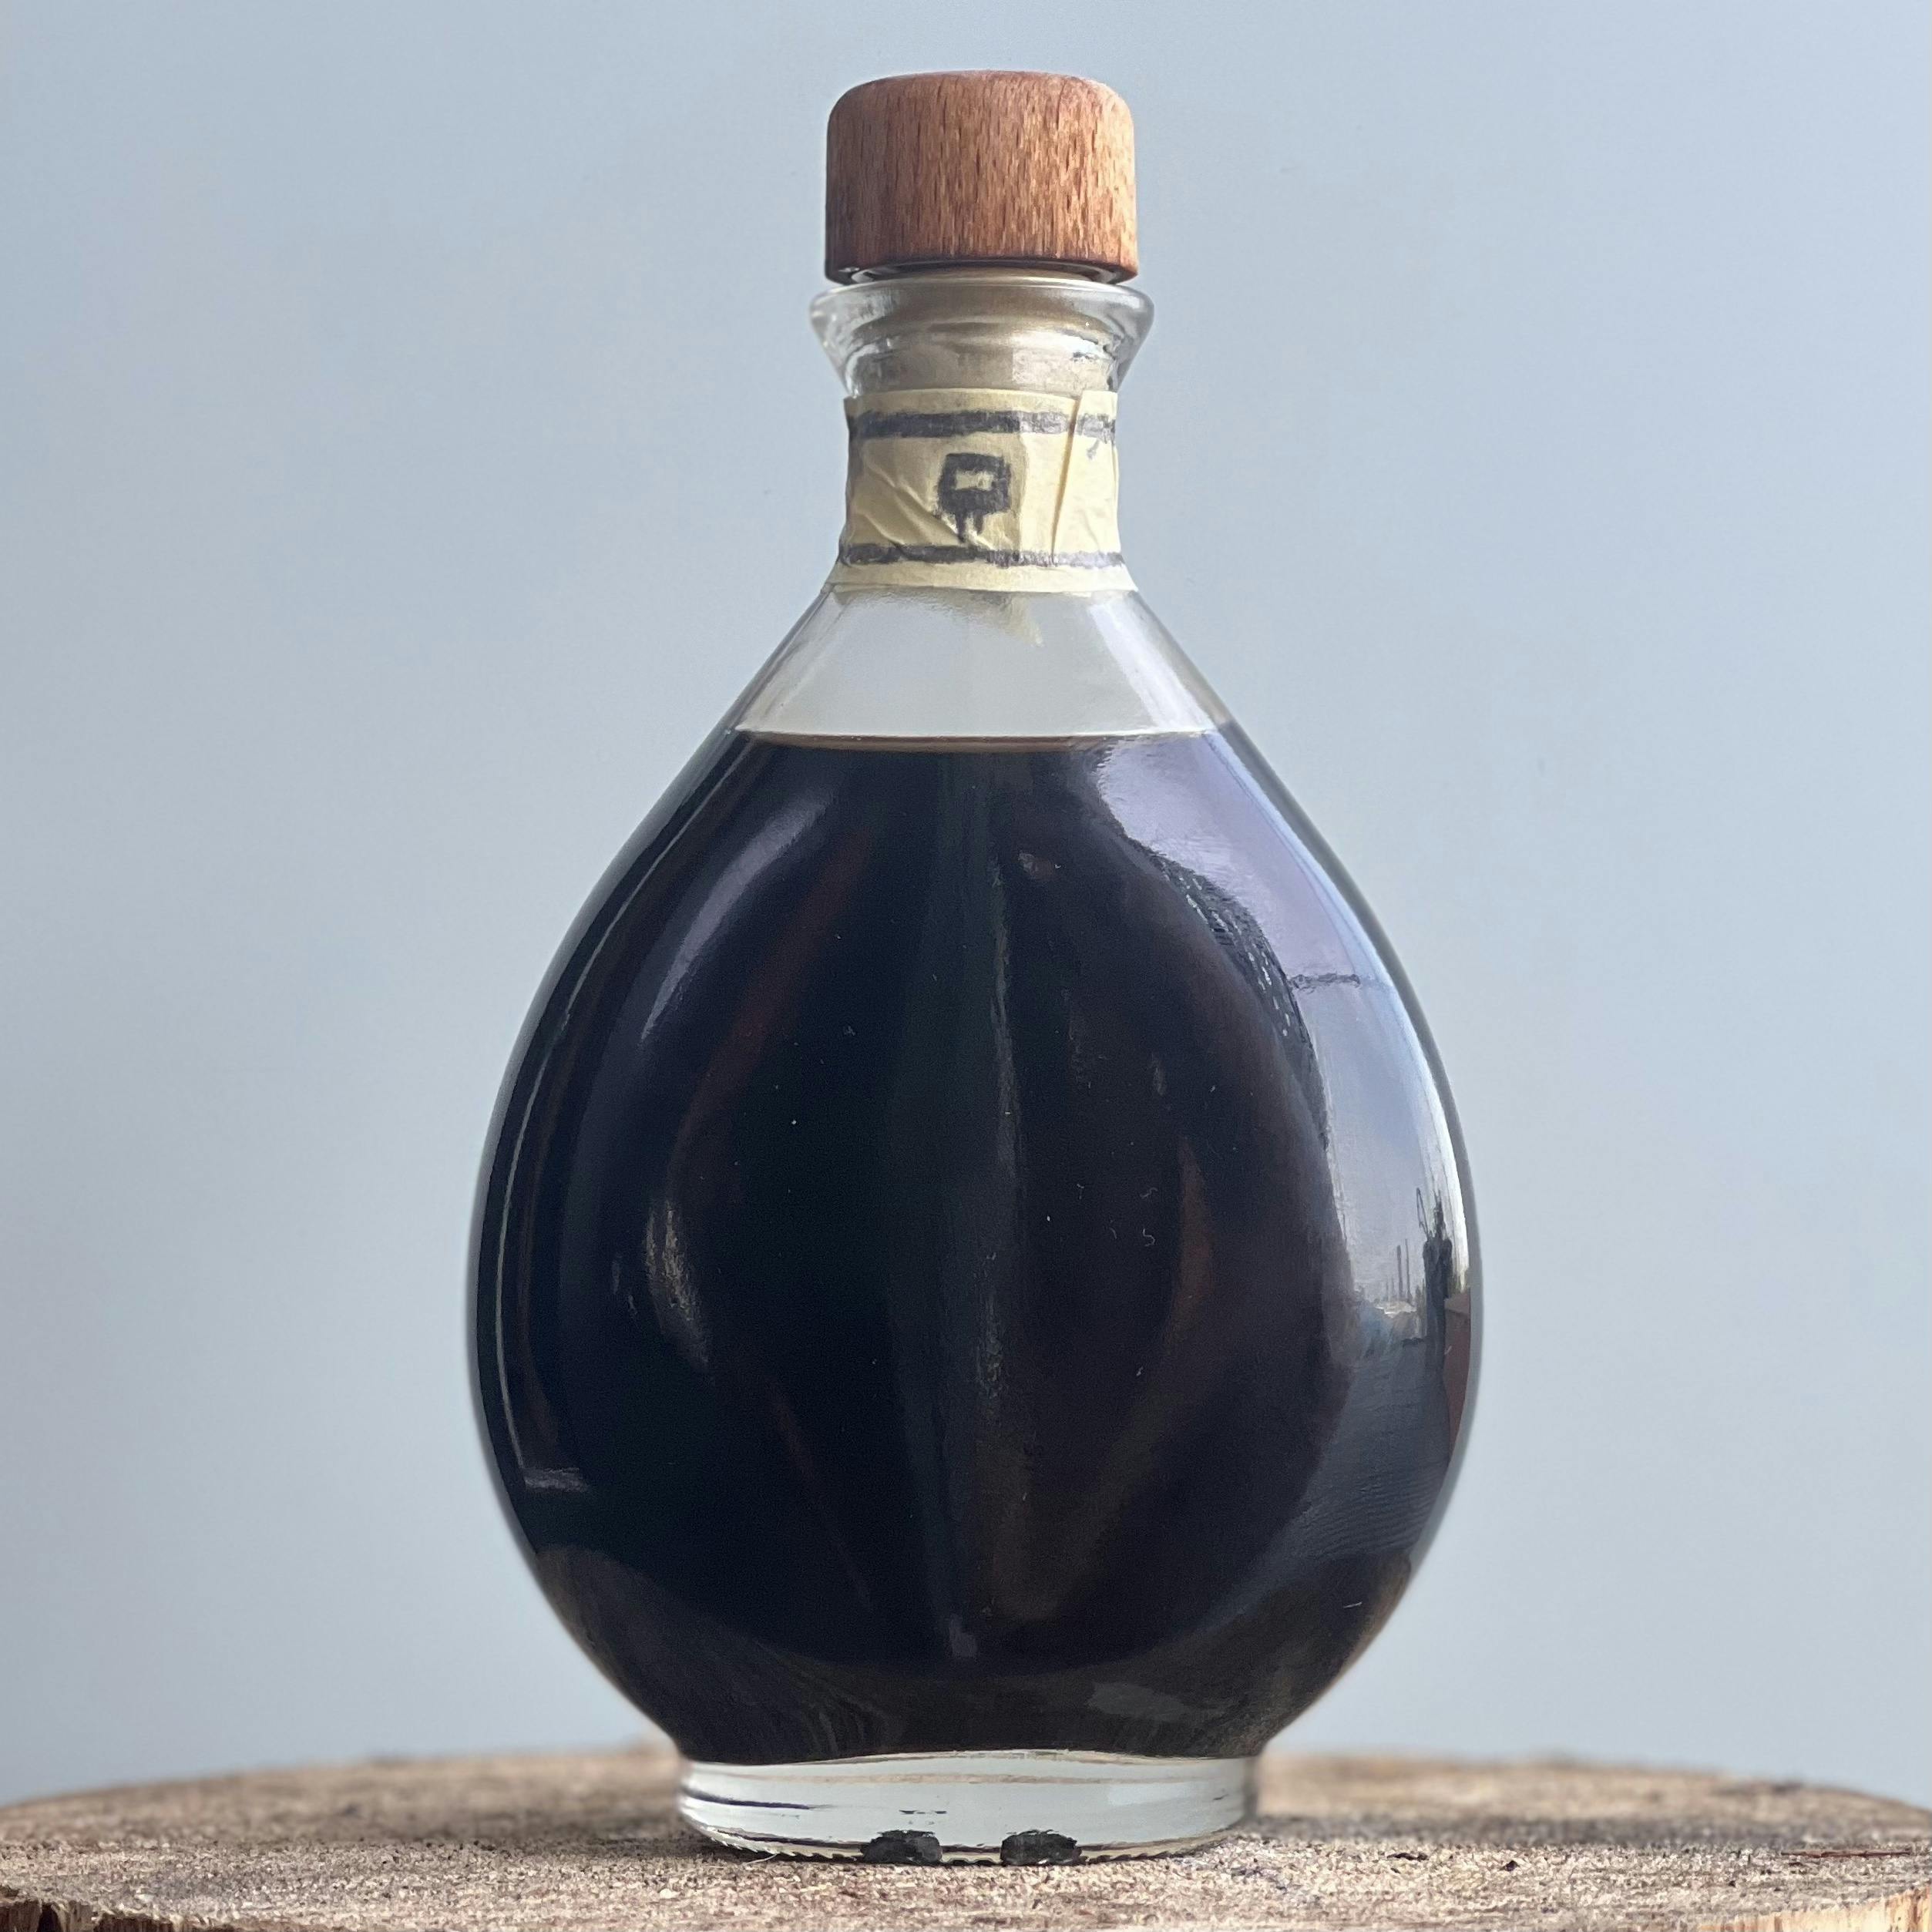 Crisp, clean photograph of a hand decorated bottle of Balsamic Vinegar